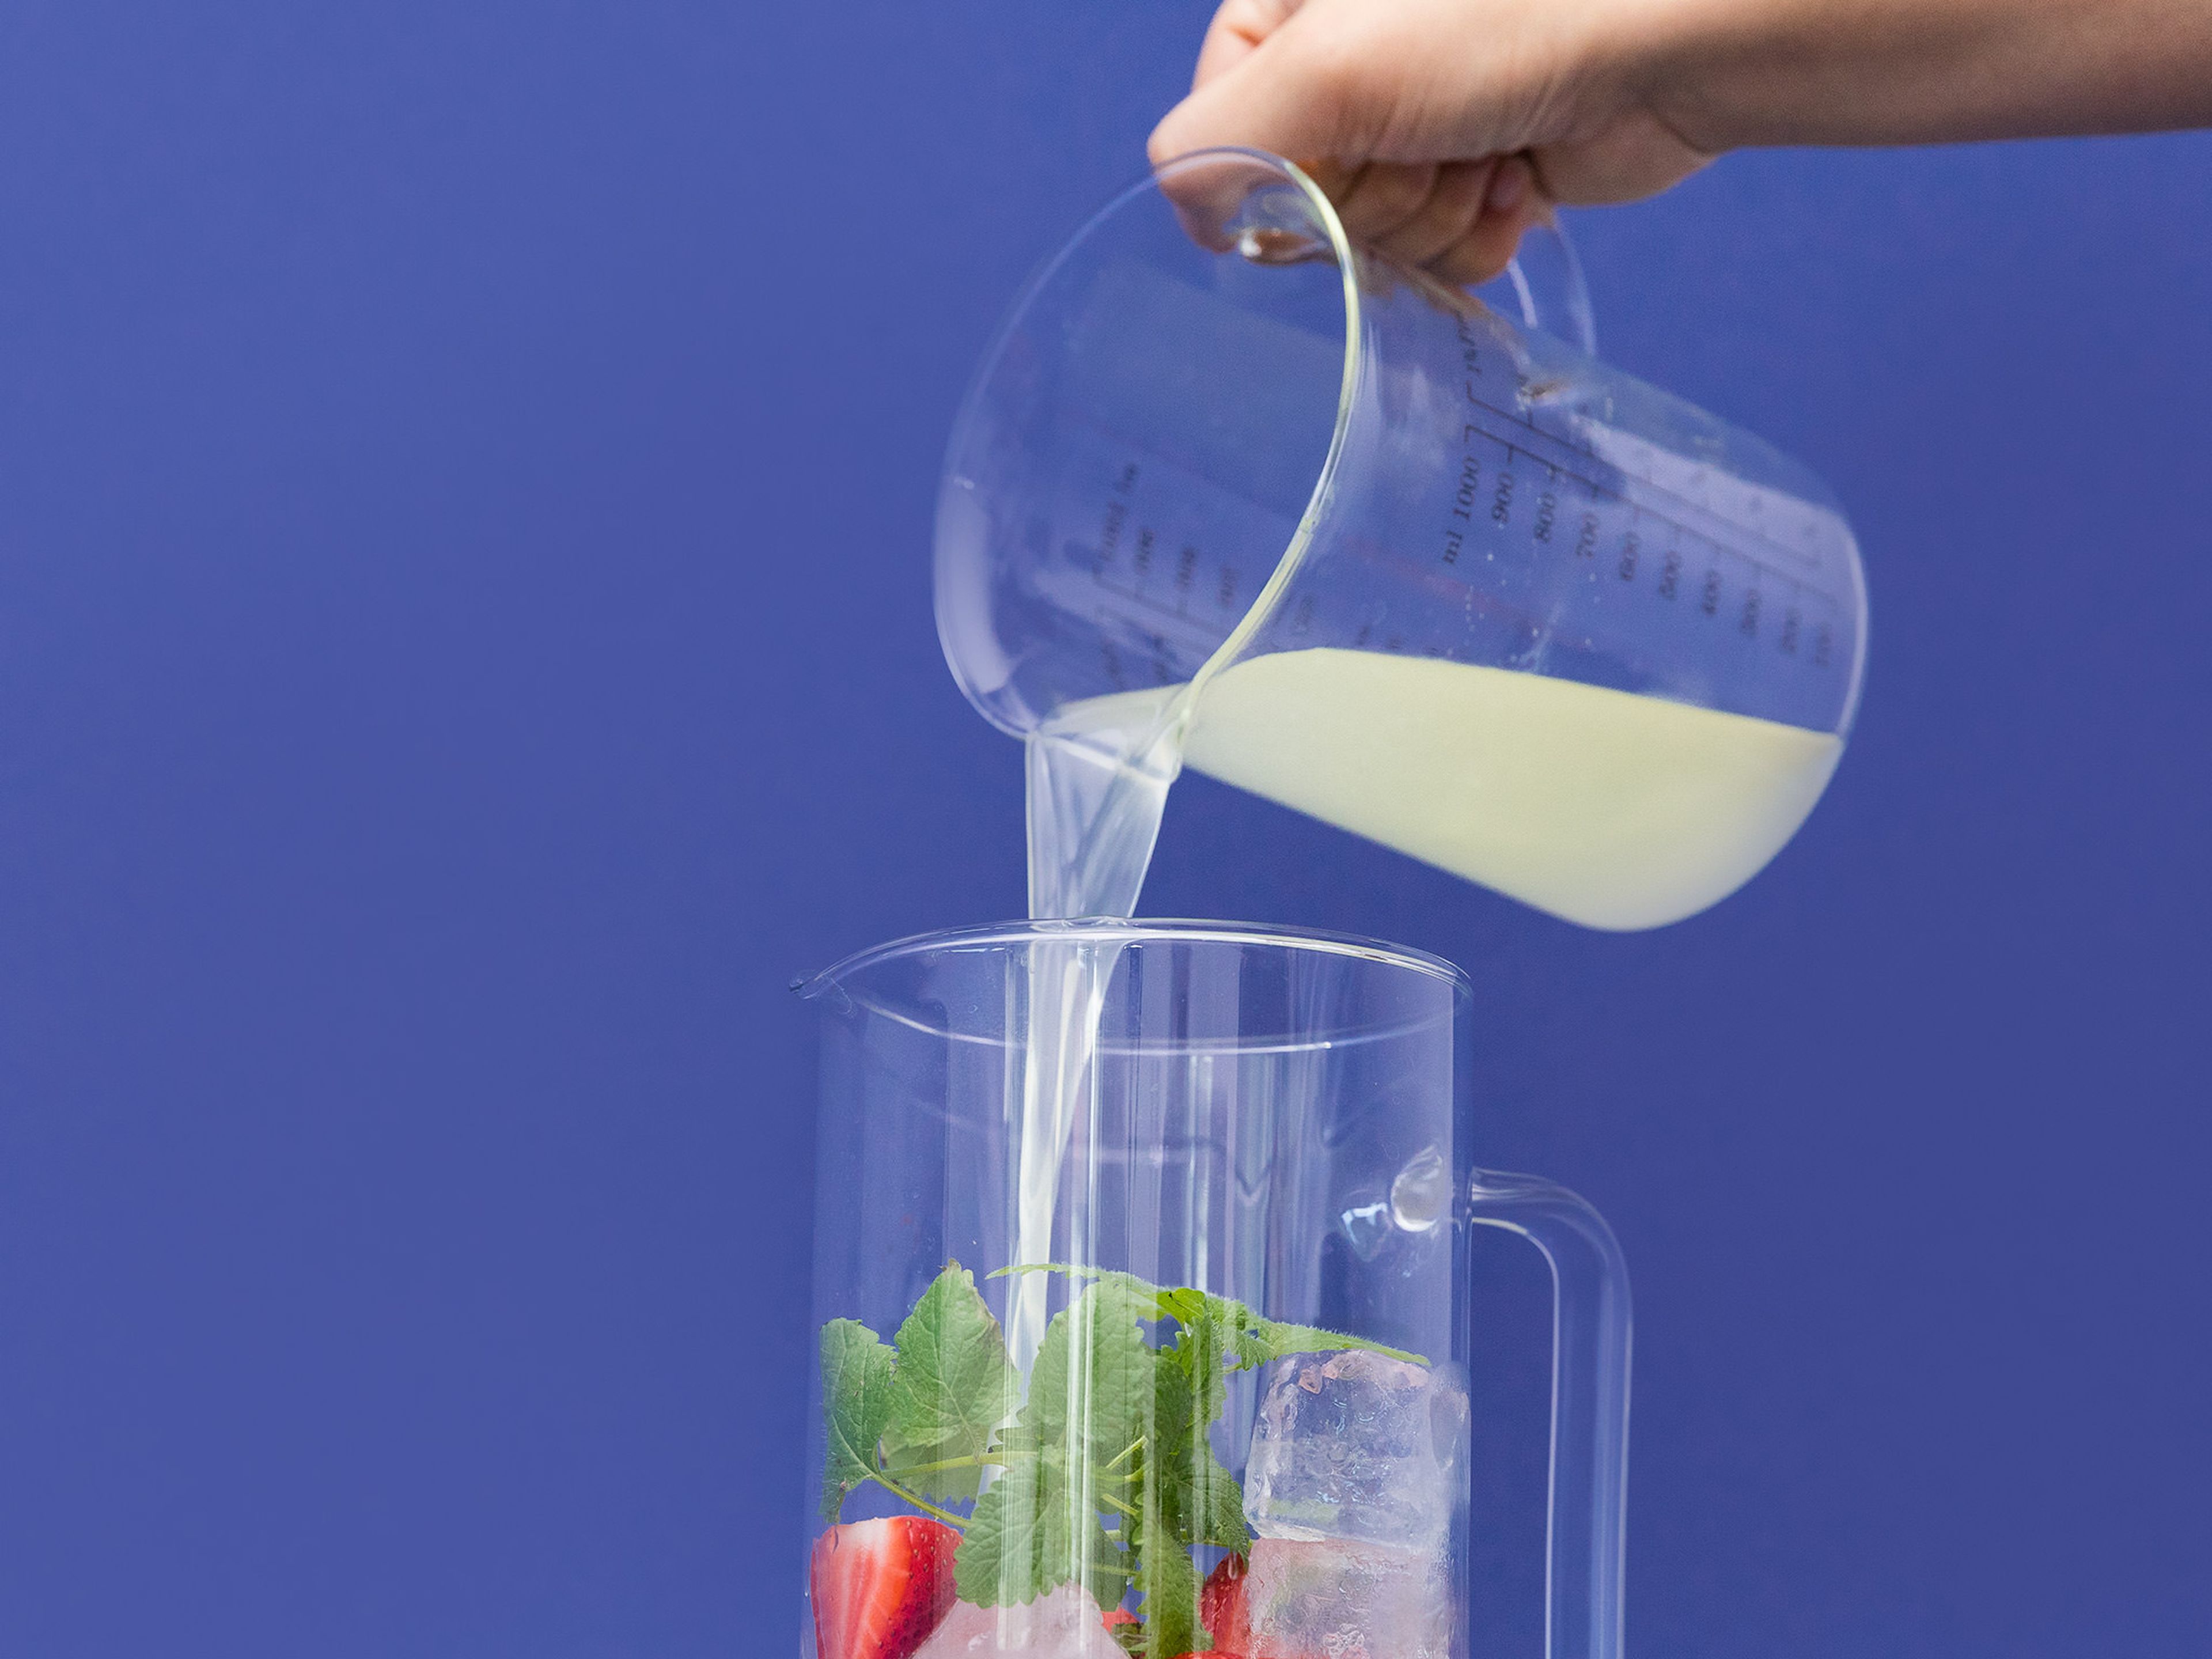 Add ice to a large pitcher. Place sliced strawberries in the pitcher and lemon balm leaves, if using. Pour in lemon juice, soda water, and strawberry puree. Stir well to ensure sugar is fully dissolved. Enjoy!